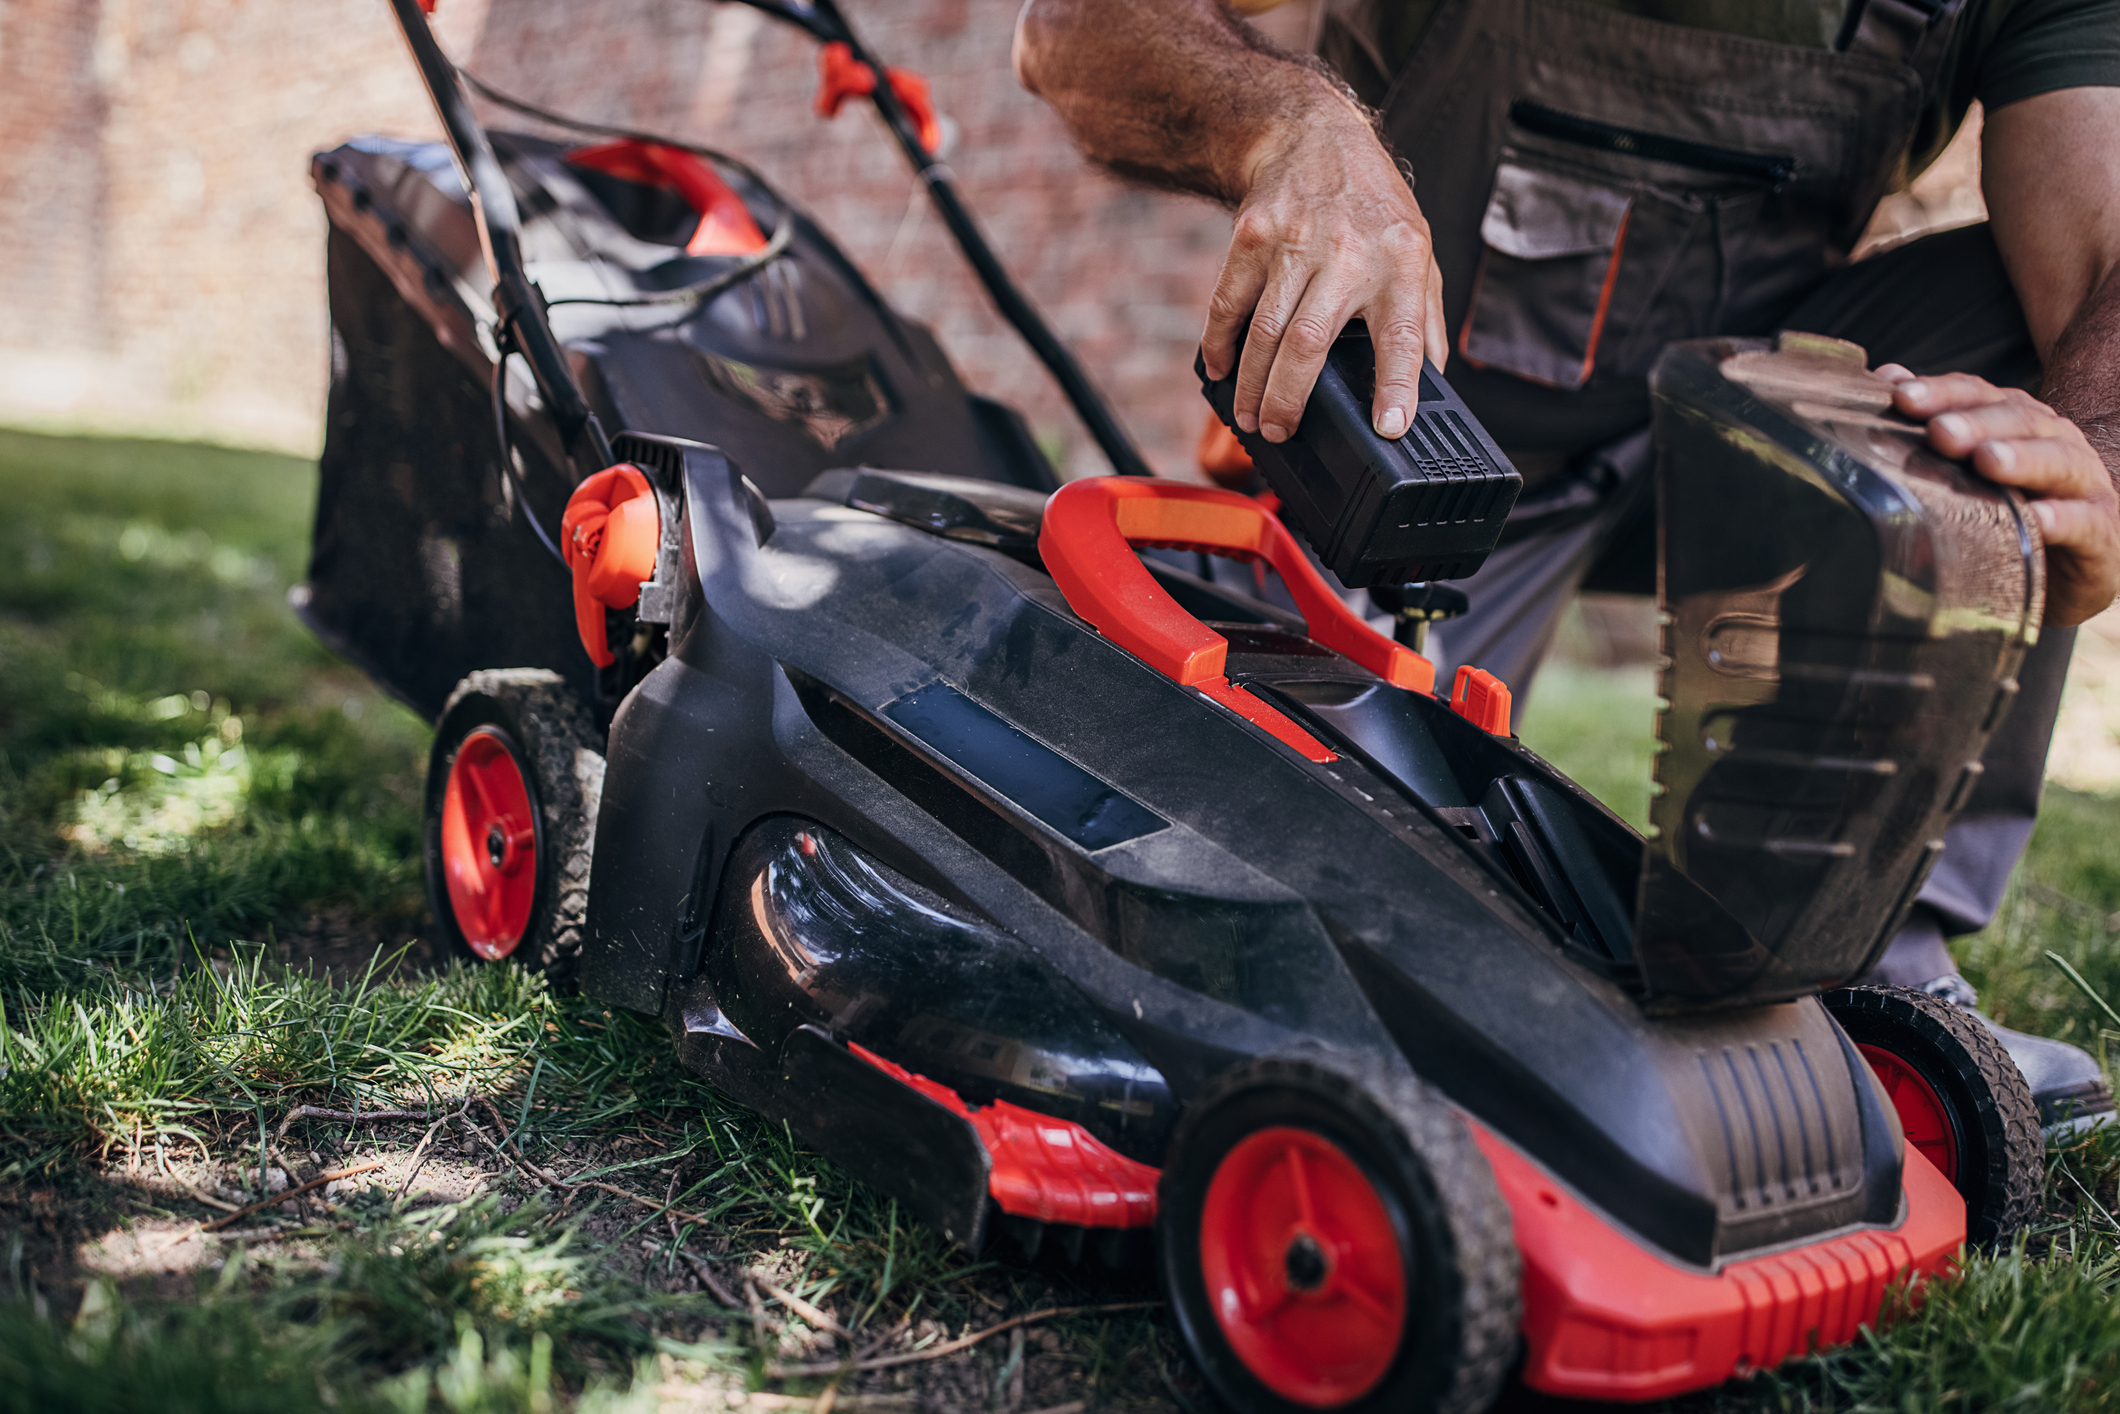 BEST Corded Lawn Mower Mowing REALLY LONG Grass - DOES IT WORK?